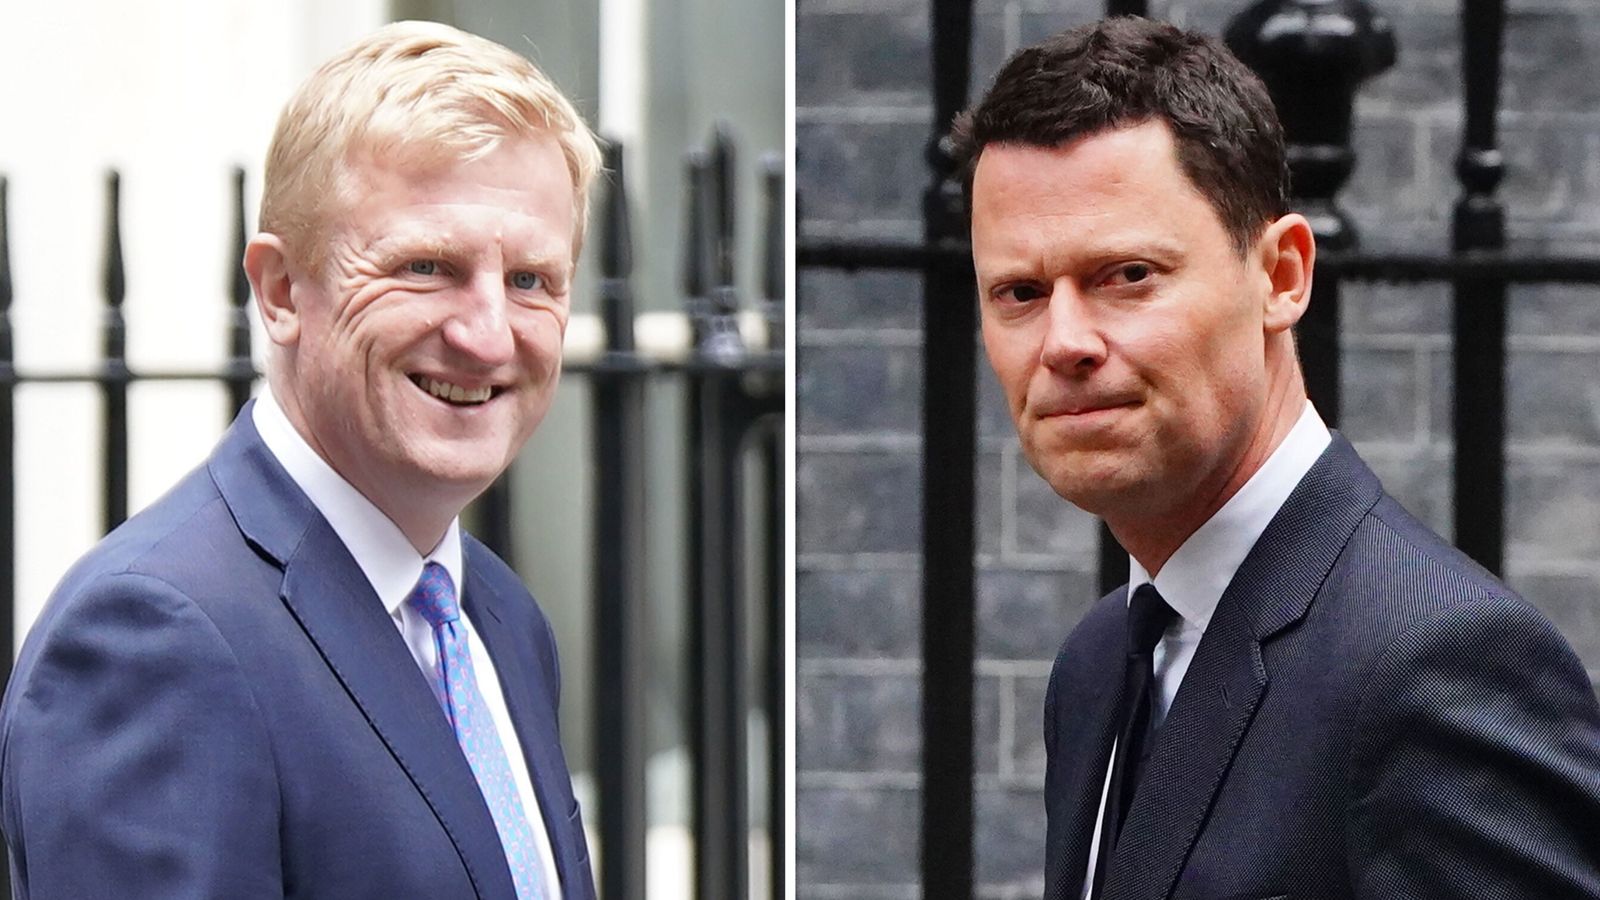 Oliver Dowden becomes new deputy PM and Alex Chalk goes to justice after Raab resignation over bullying report